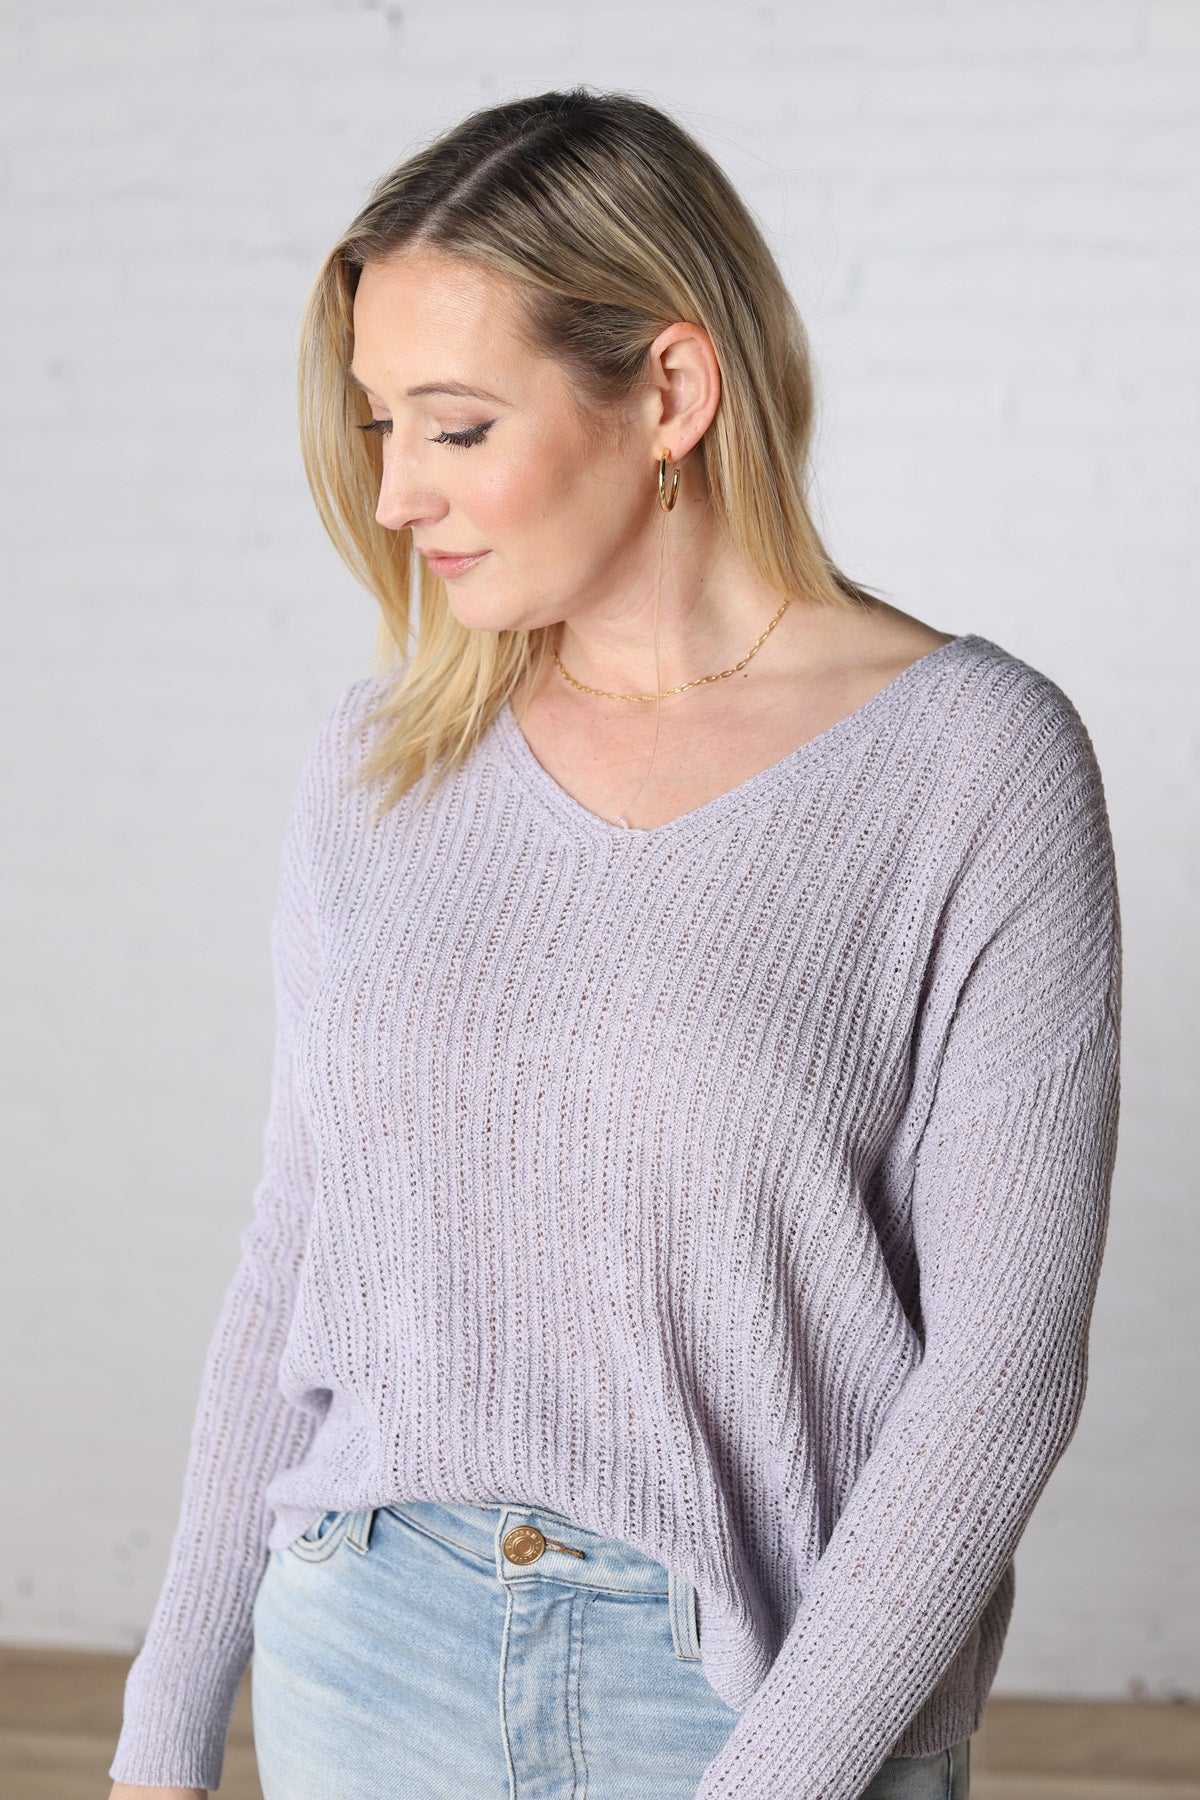 Lorelie Sheer Knit Pullover Sweater